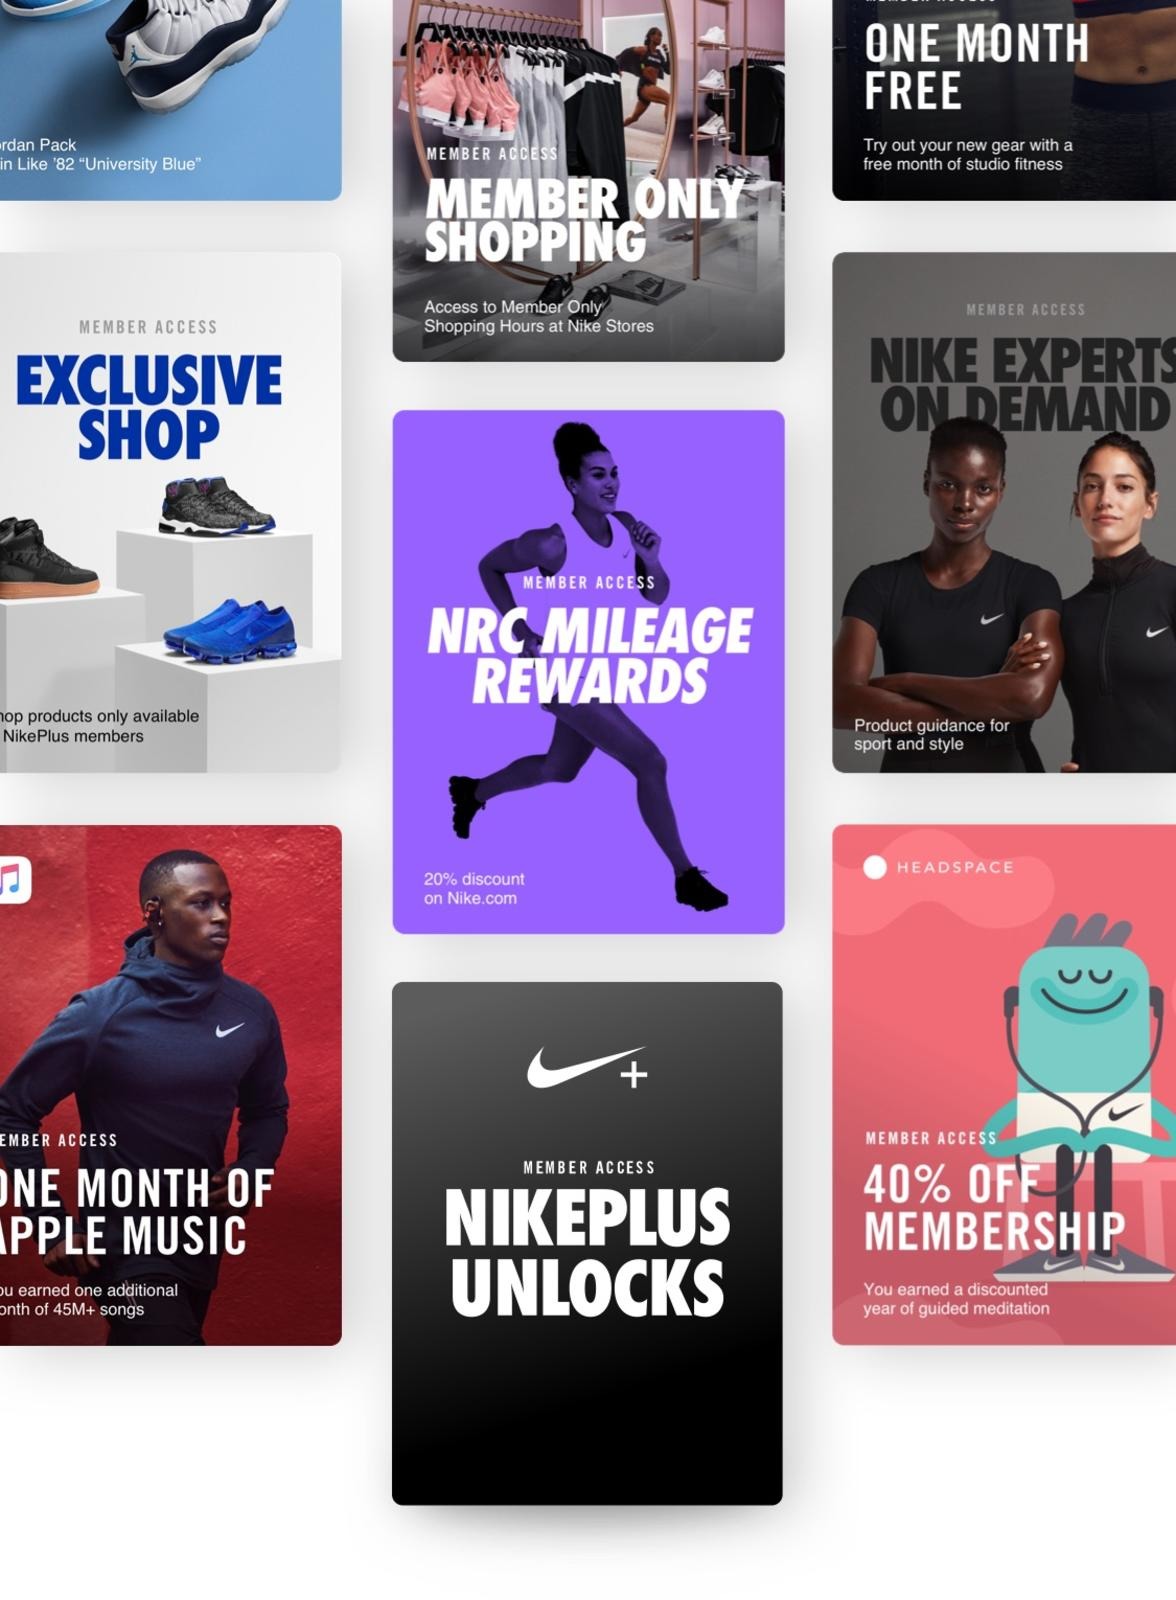 Nike adds Apple Music to perks for 